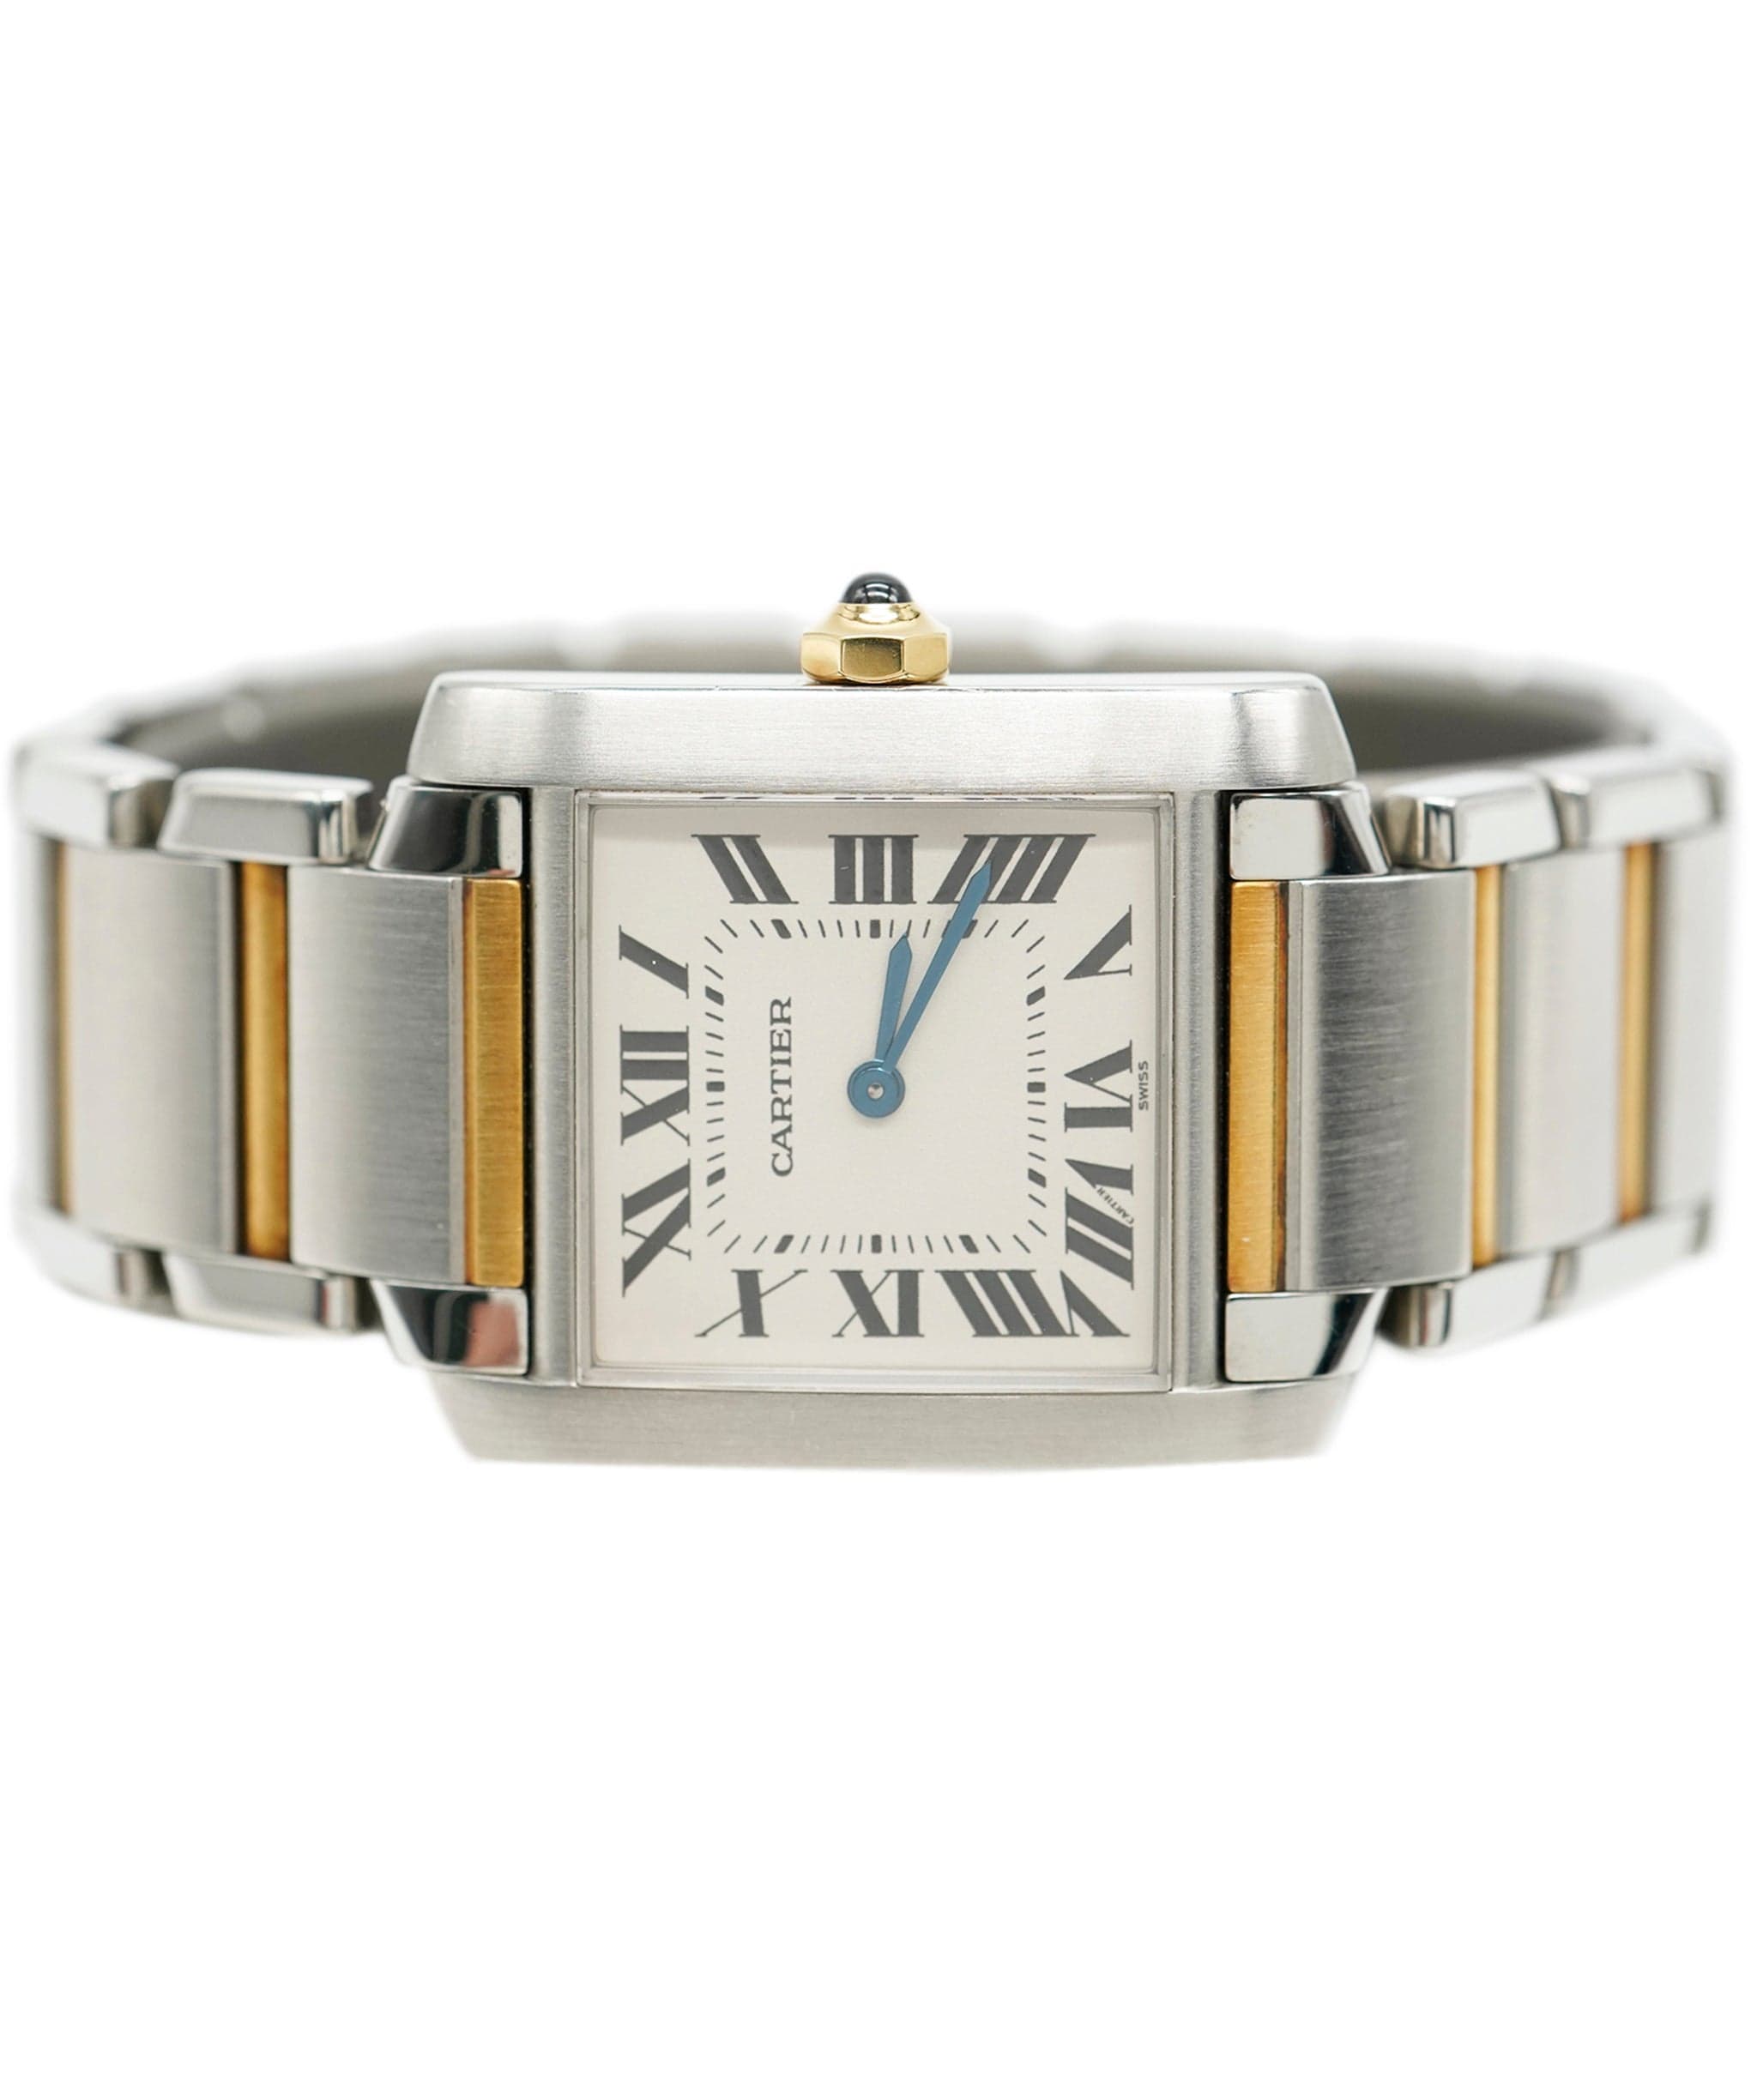 Cartier Cartier Tank Mid Size Steel and Gold Mid size, sn: CC538936	 AGC1562